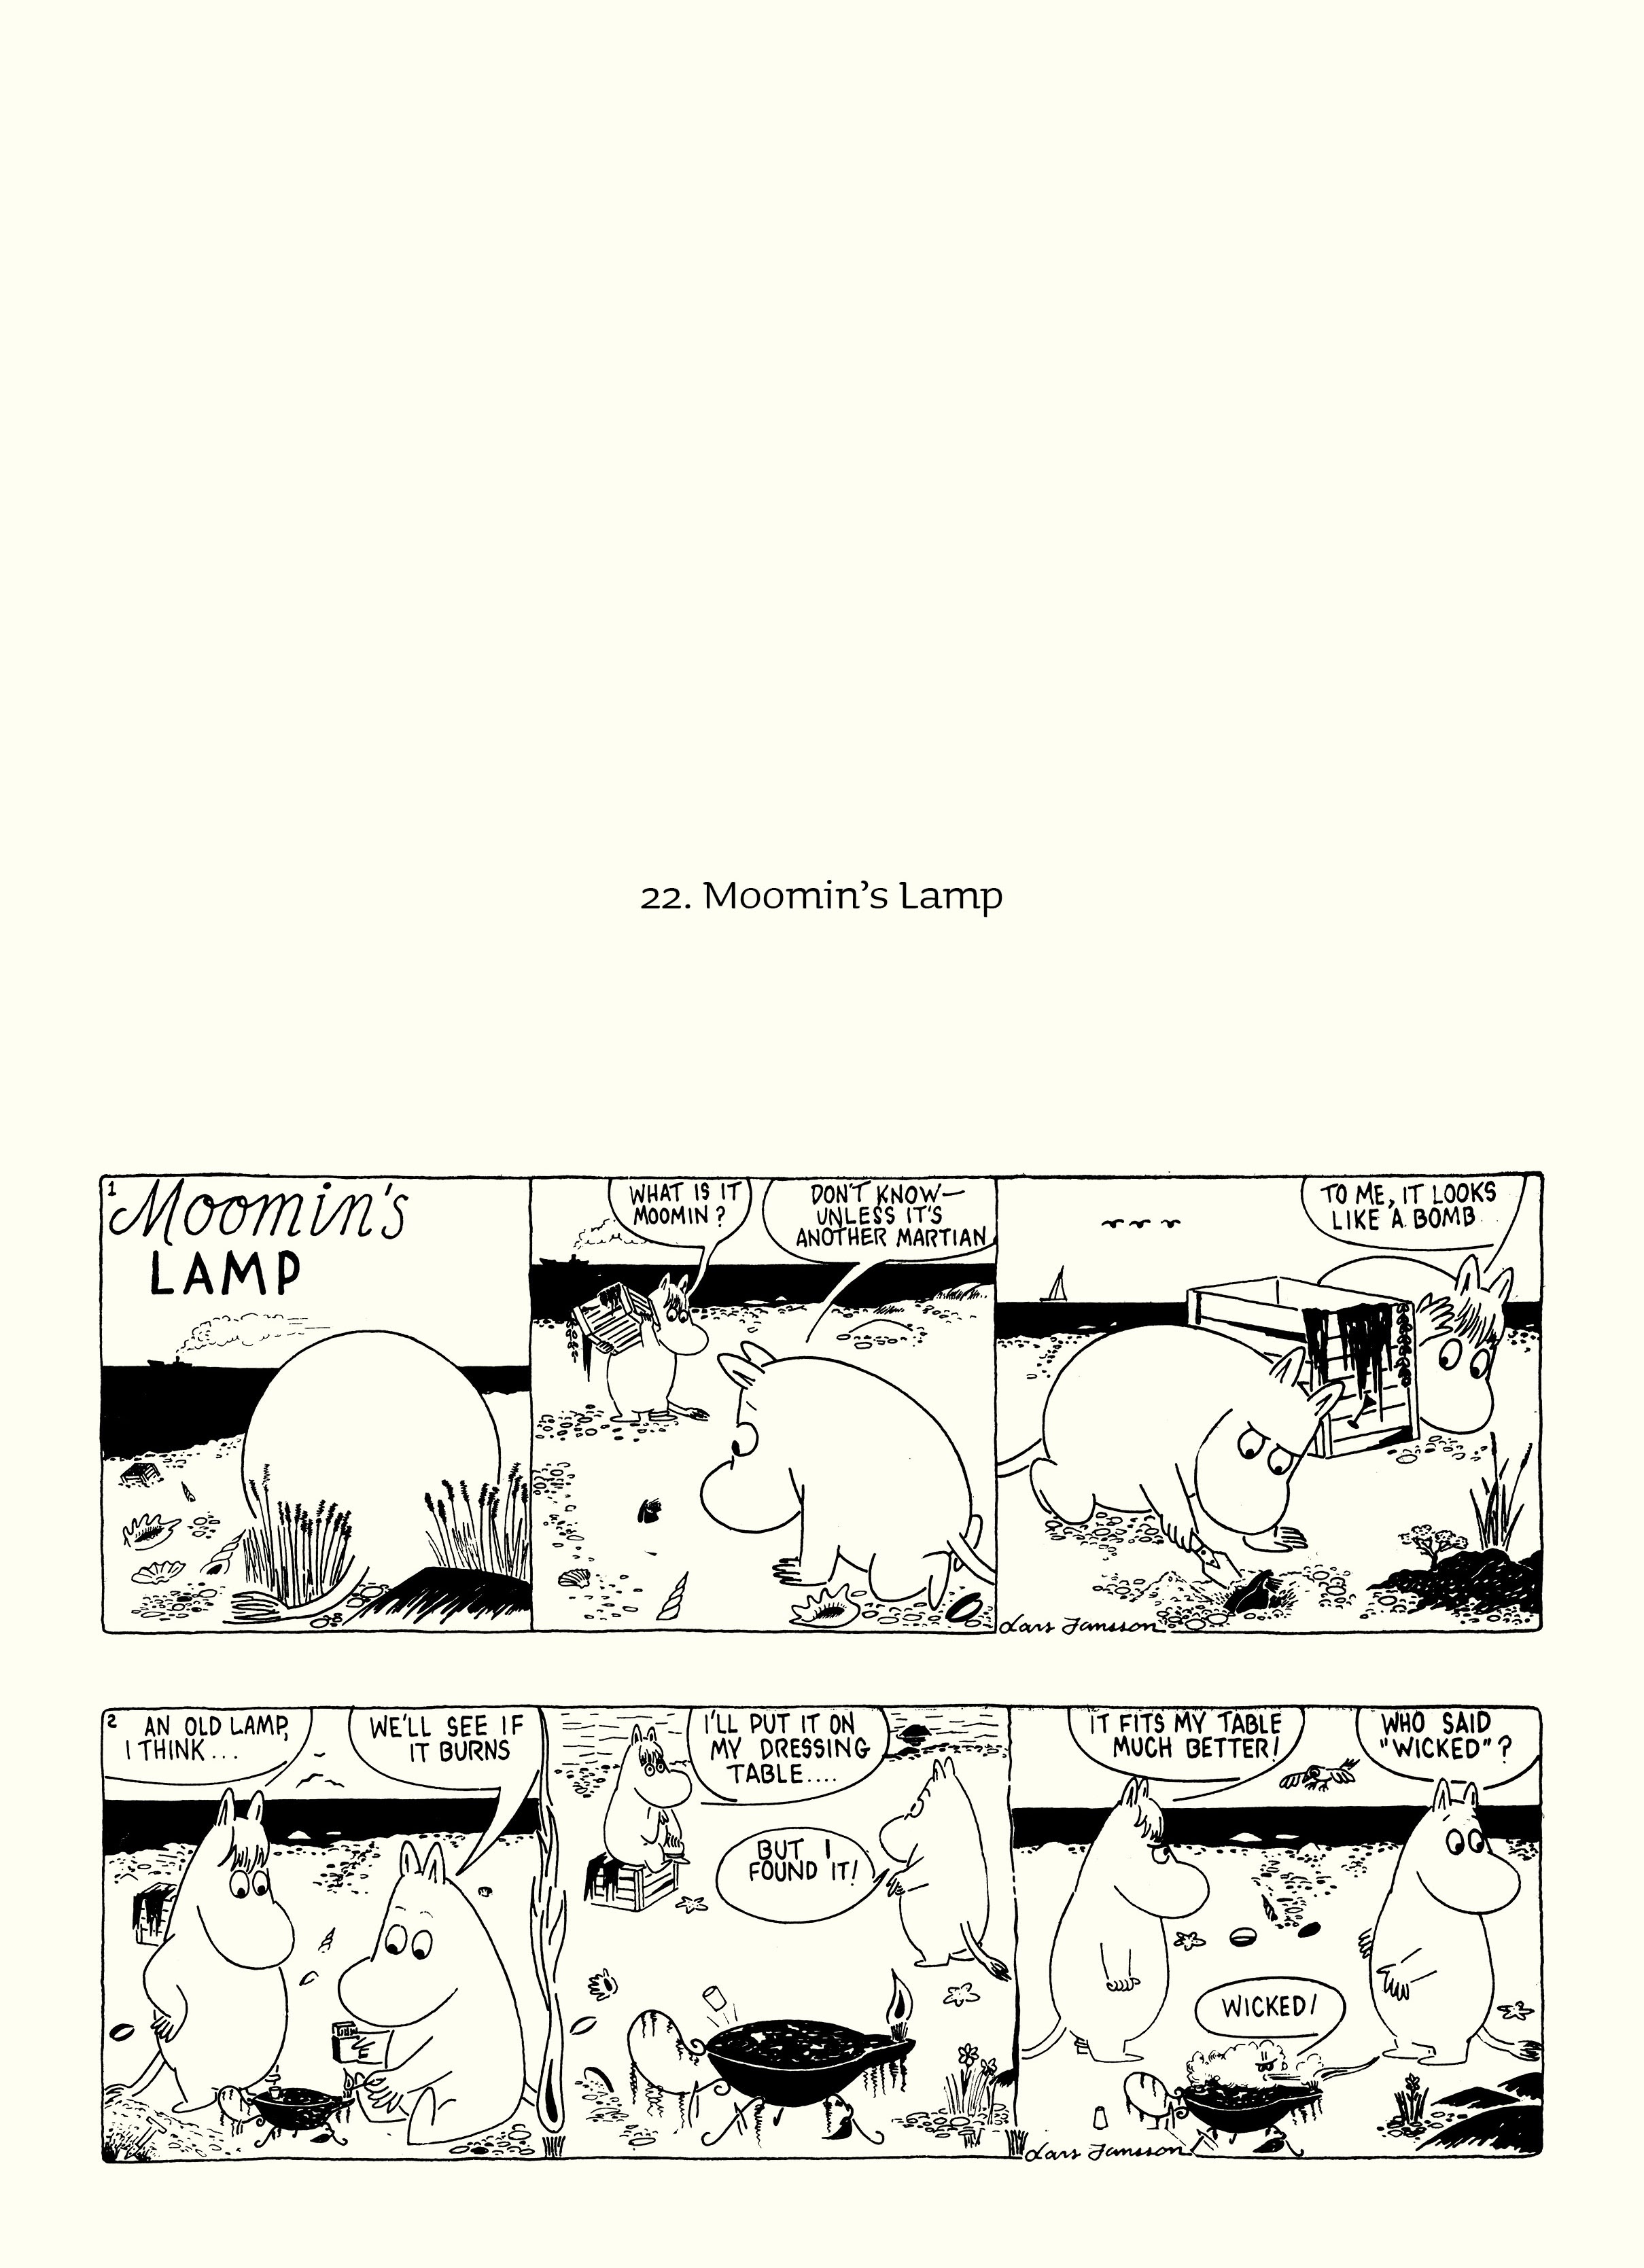 Read online Moomin: The Complete Lars Jansson Comic Strip comic -  Issue # TPB 6 - 6